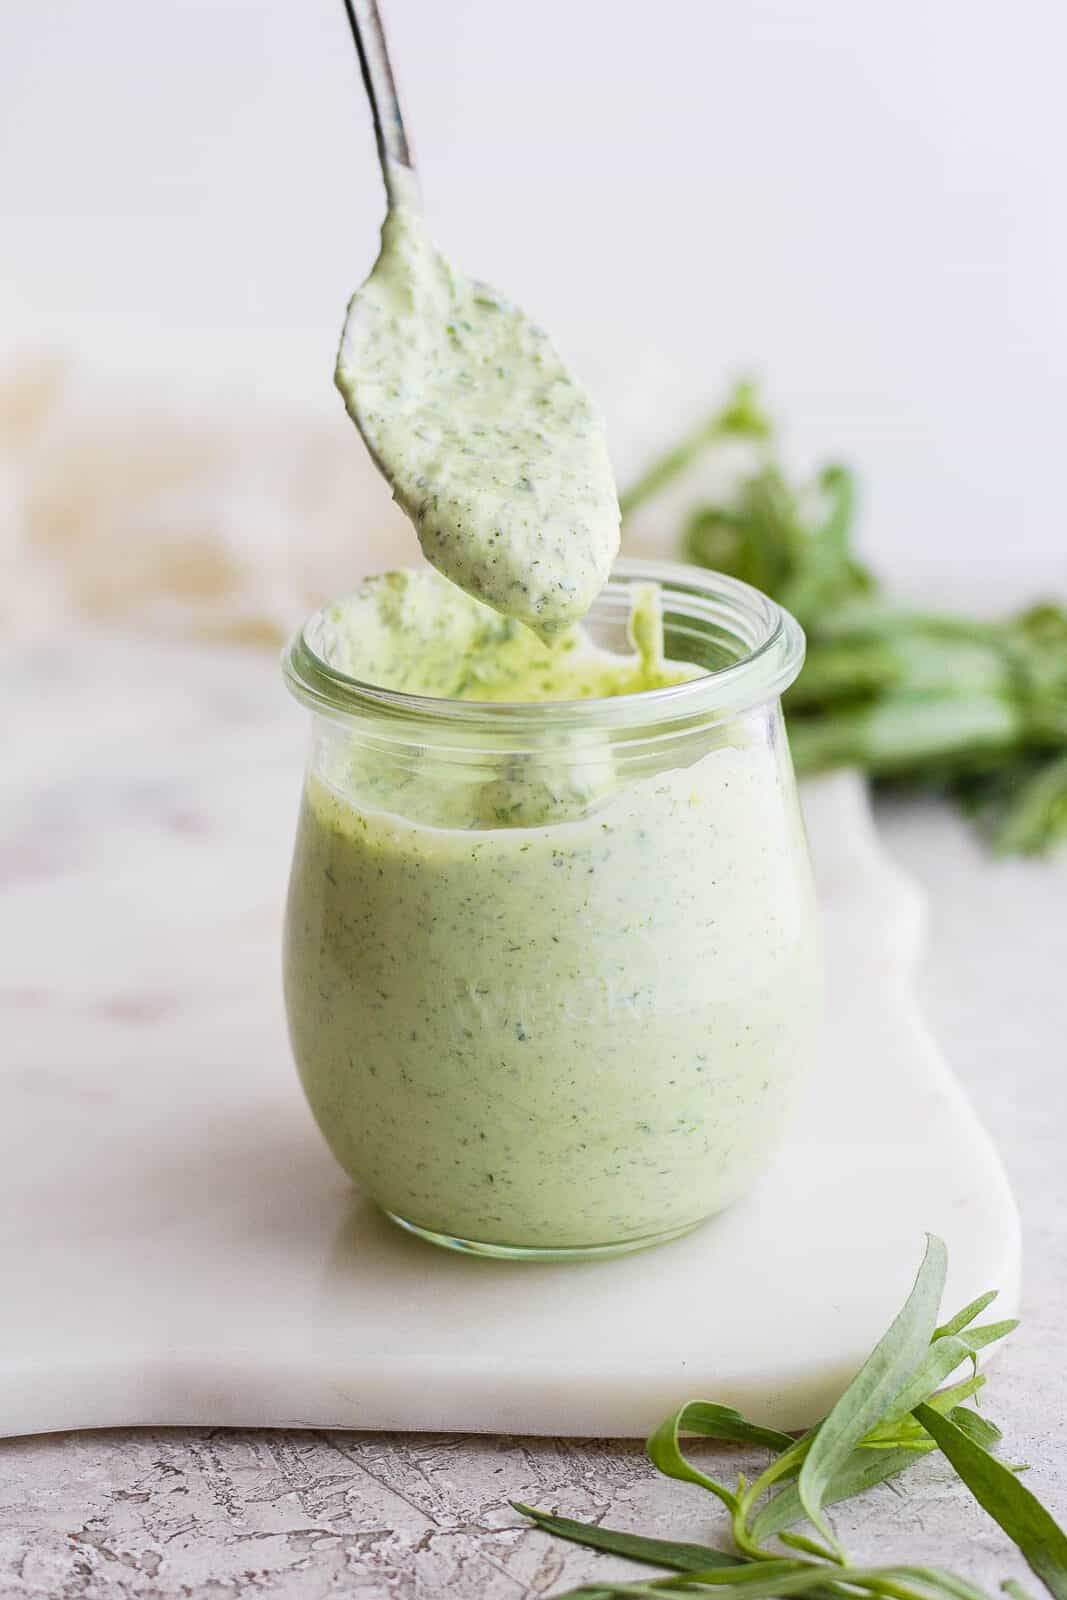 Green goddess dressing dripping off a spoon and into a jar.